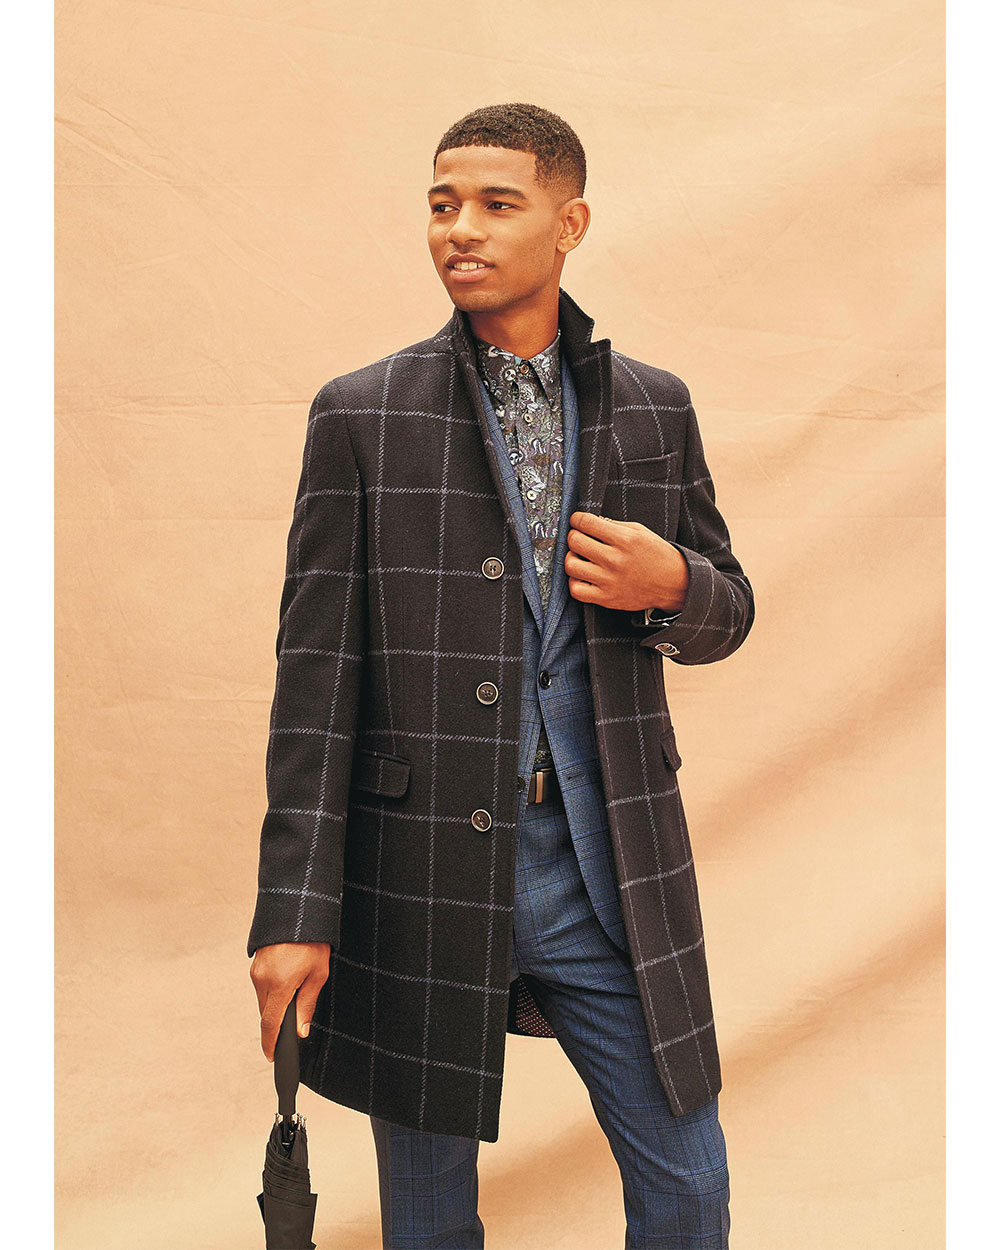 Stylish Dressing Through Layering - For The Gent - Lizzy Eden Personal ...